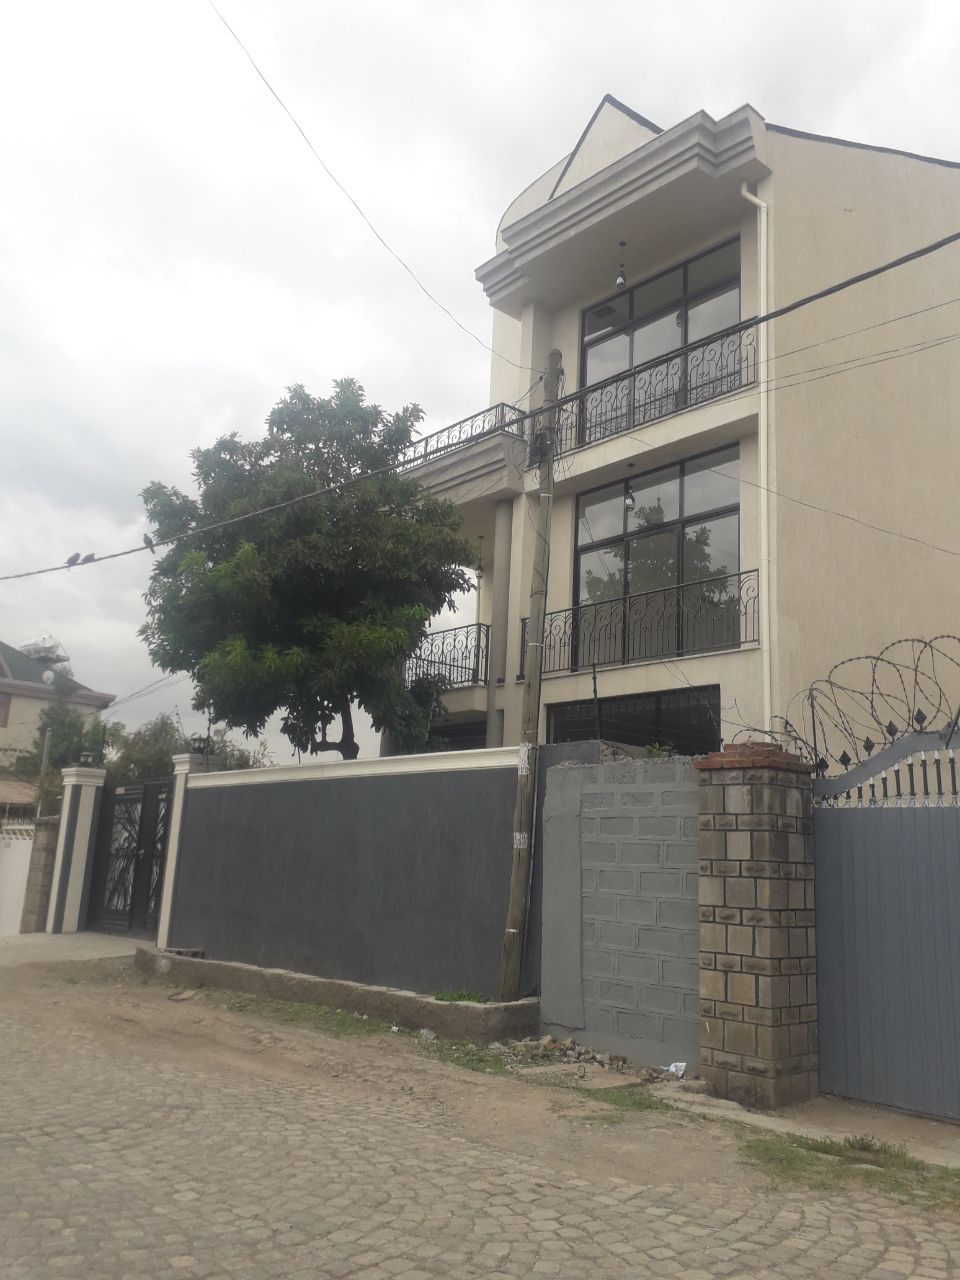 7 Bedrooms House For Rent In Bole, “Ministroch Sefer”